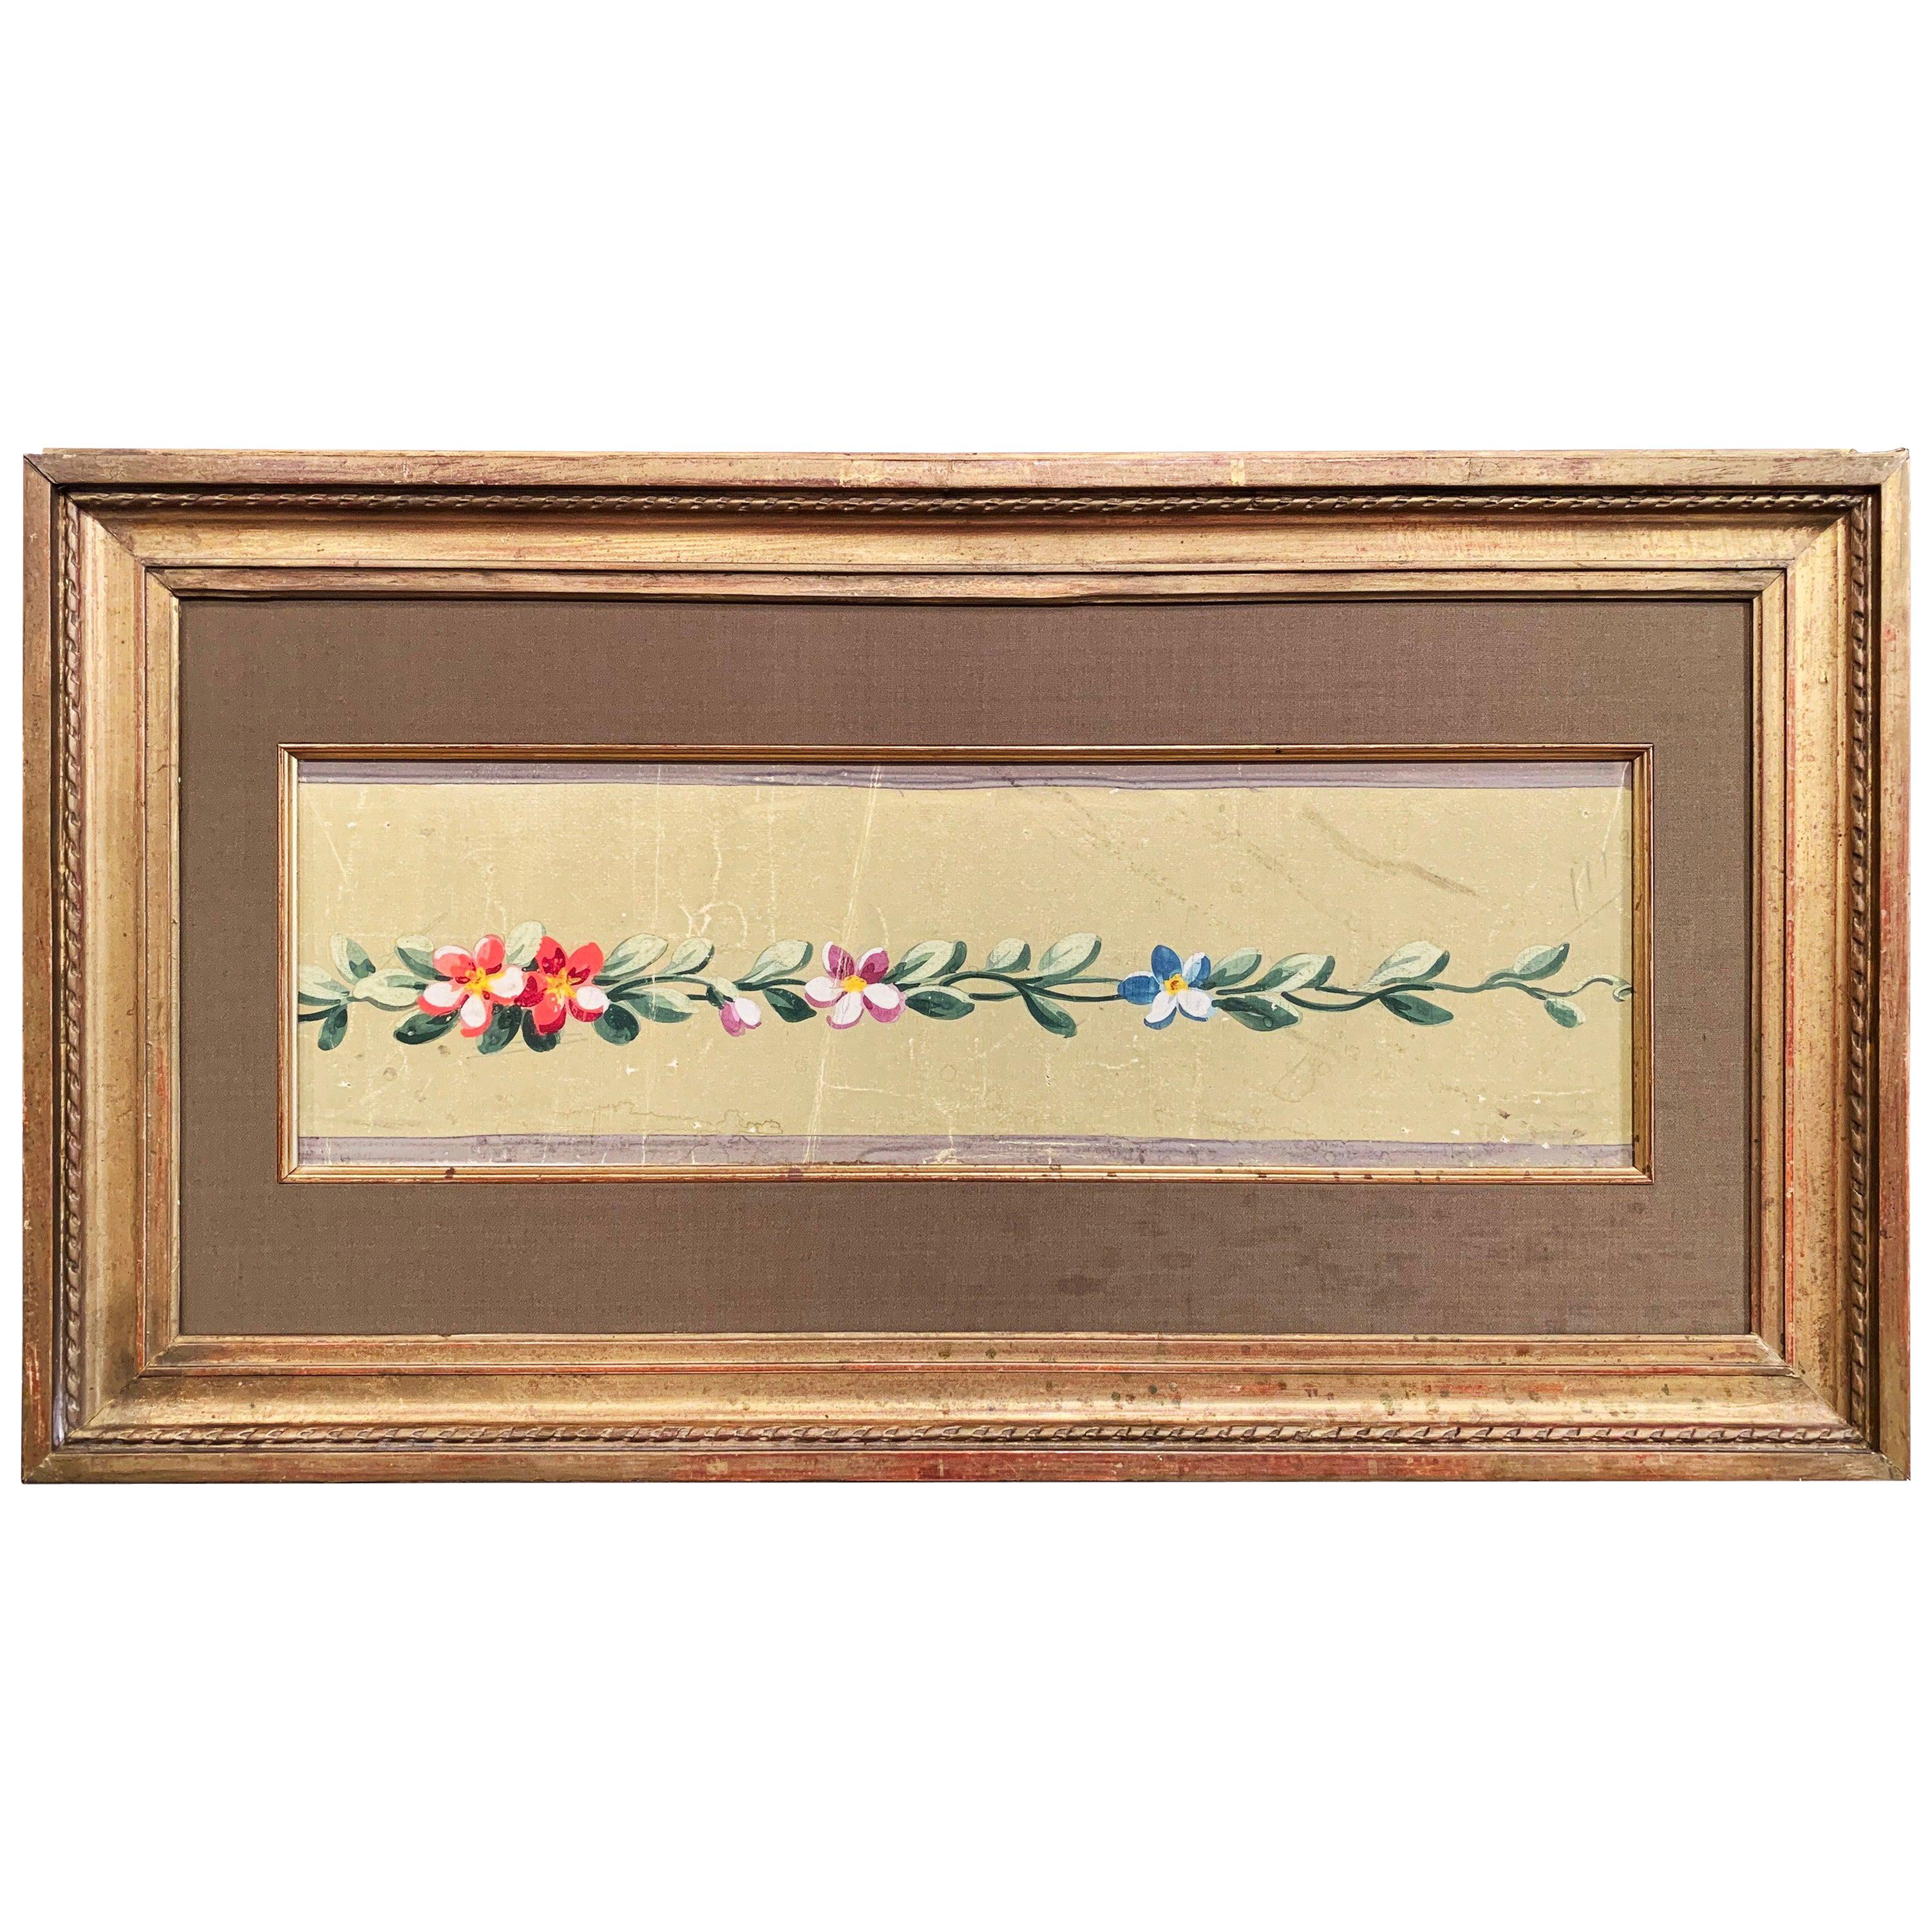 19th Century French Aubusson Floral Tapestry Gouache on Paper in Gilt Frame